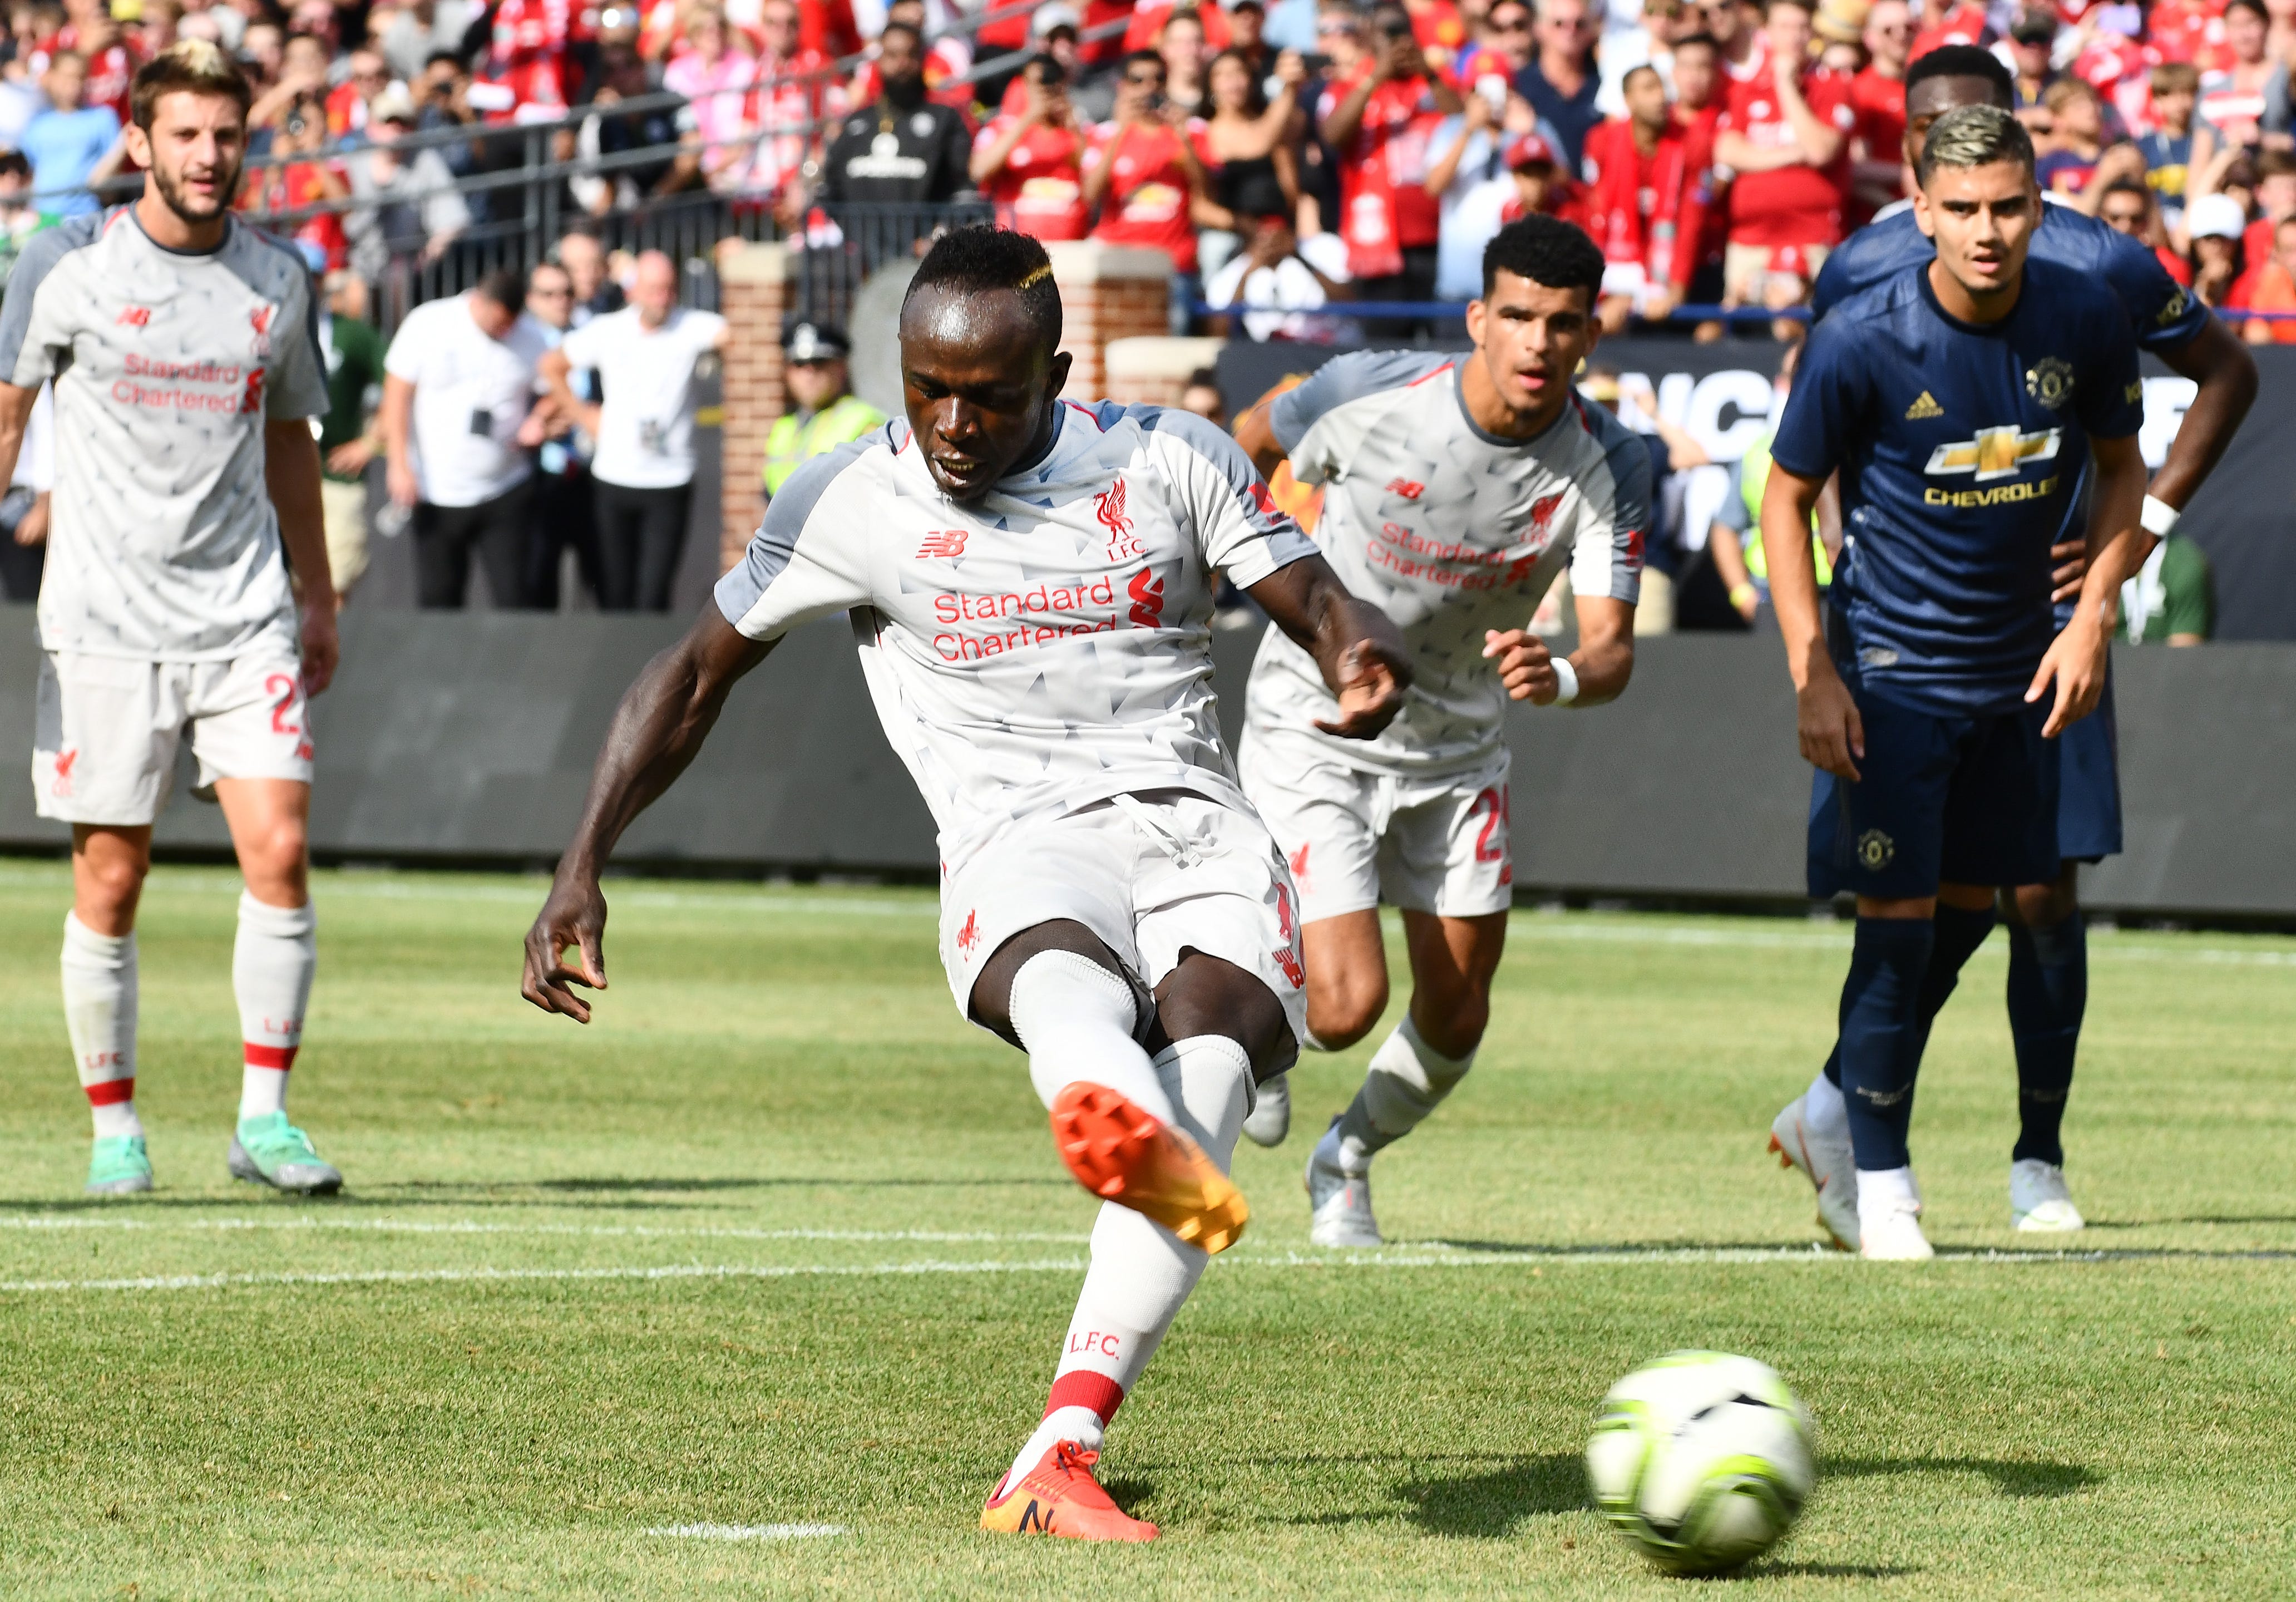 Liverpool's Sadio Mane puts in a penalty shot for the first goal of the game in the first half.